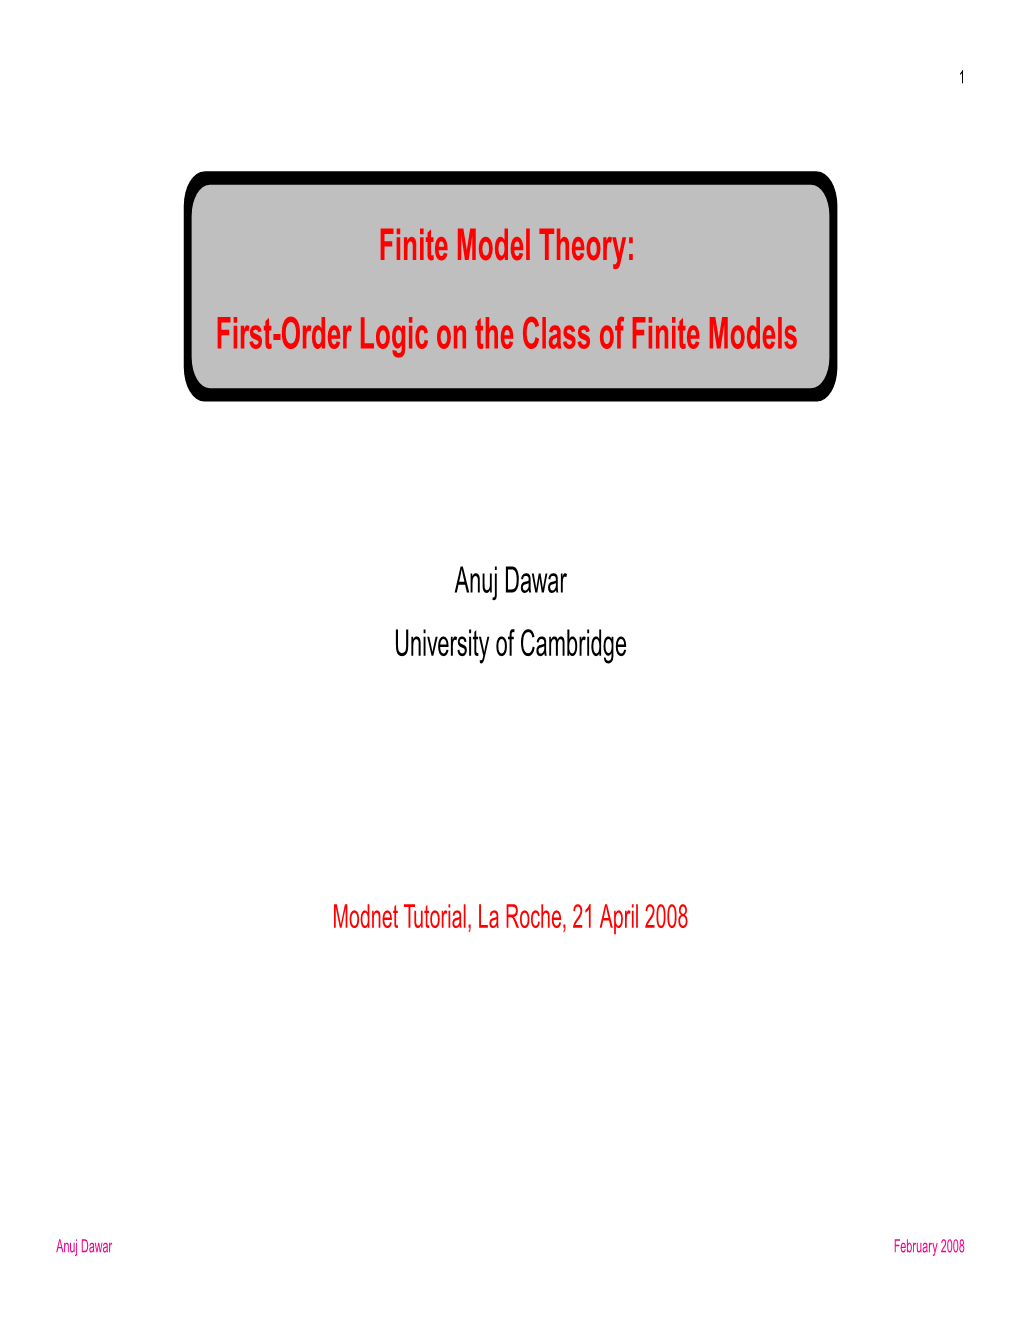 Finite Model Theory: First-Order Logic on the Class of Finite Models